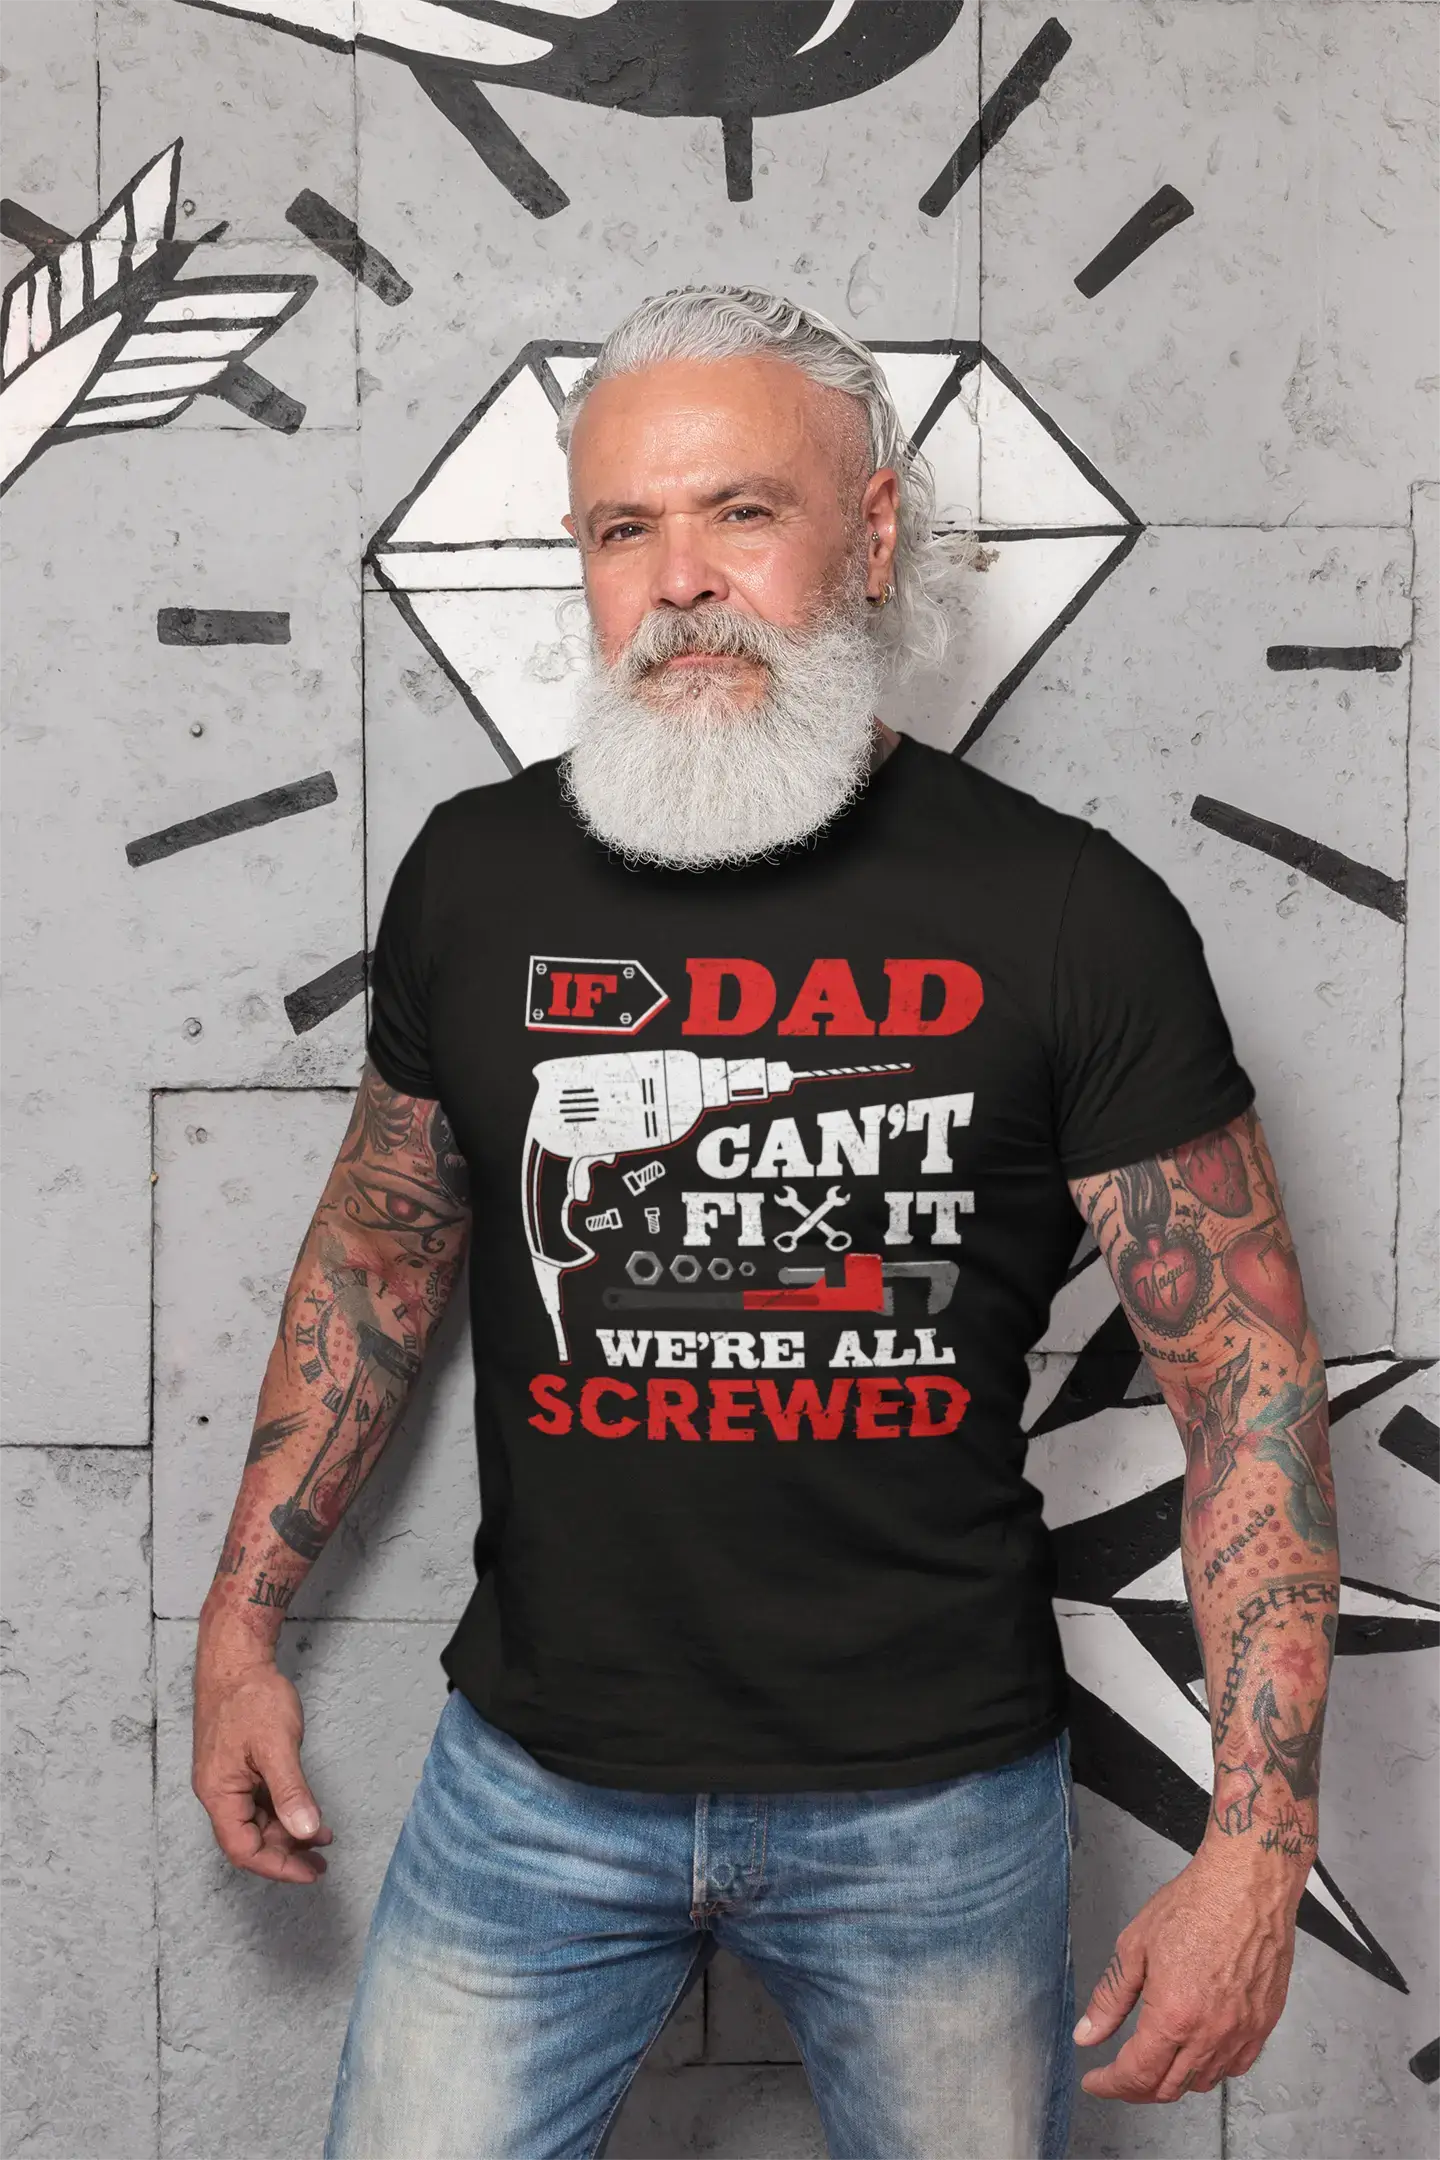 ULTRABASIC Men's Graphic T-Shirt If Dad Can't Fix It - We're All Screwed - Funny Father's Gift